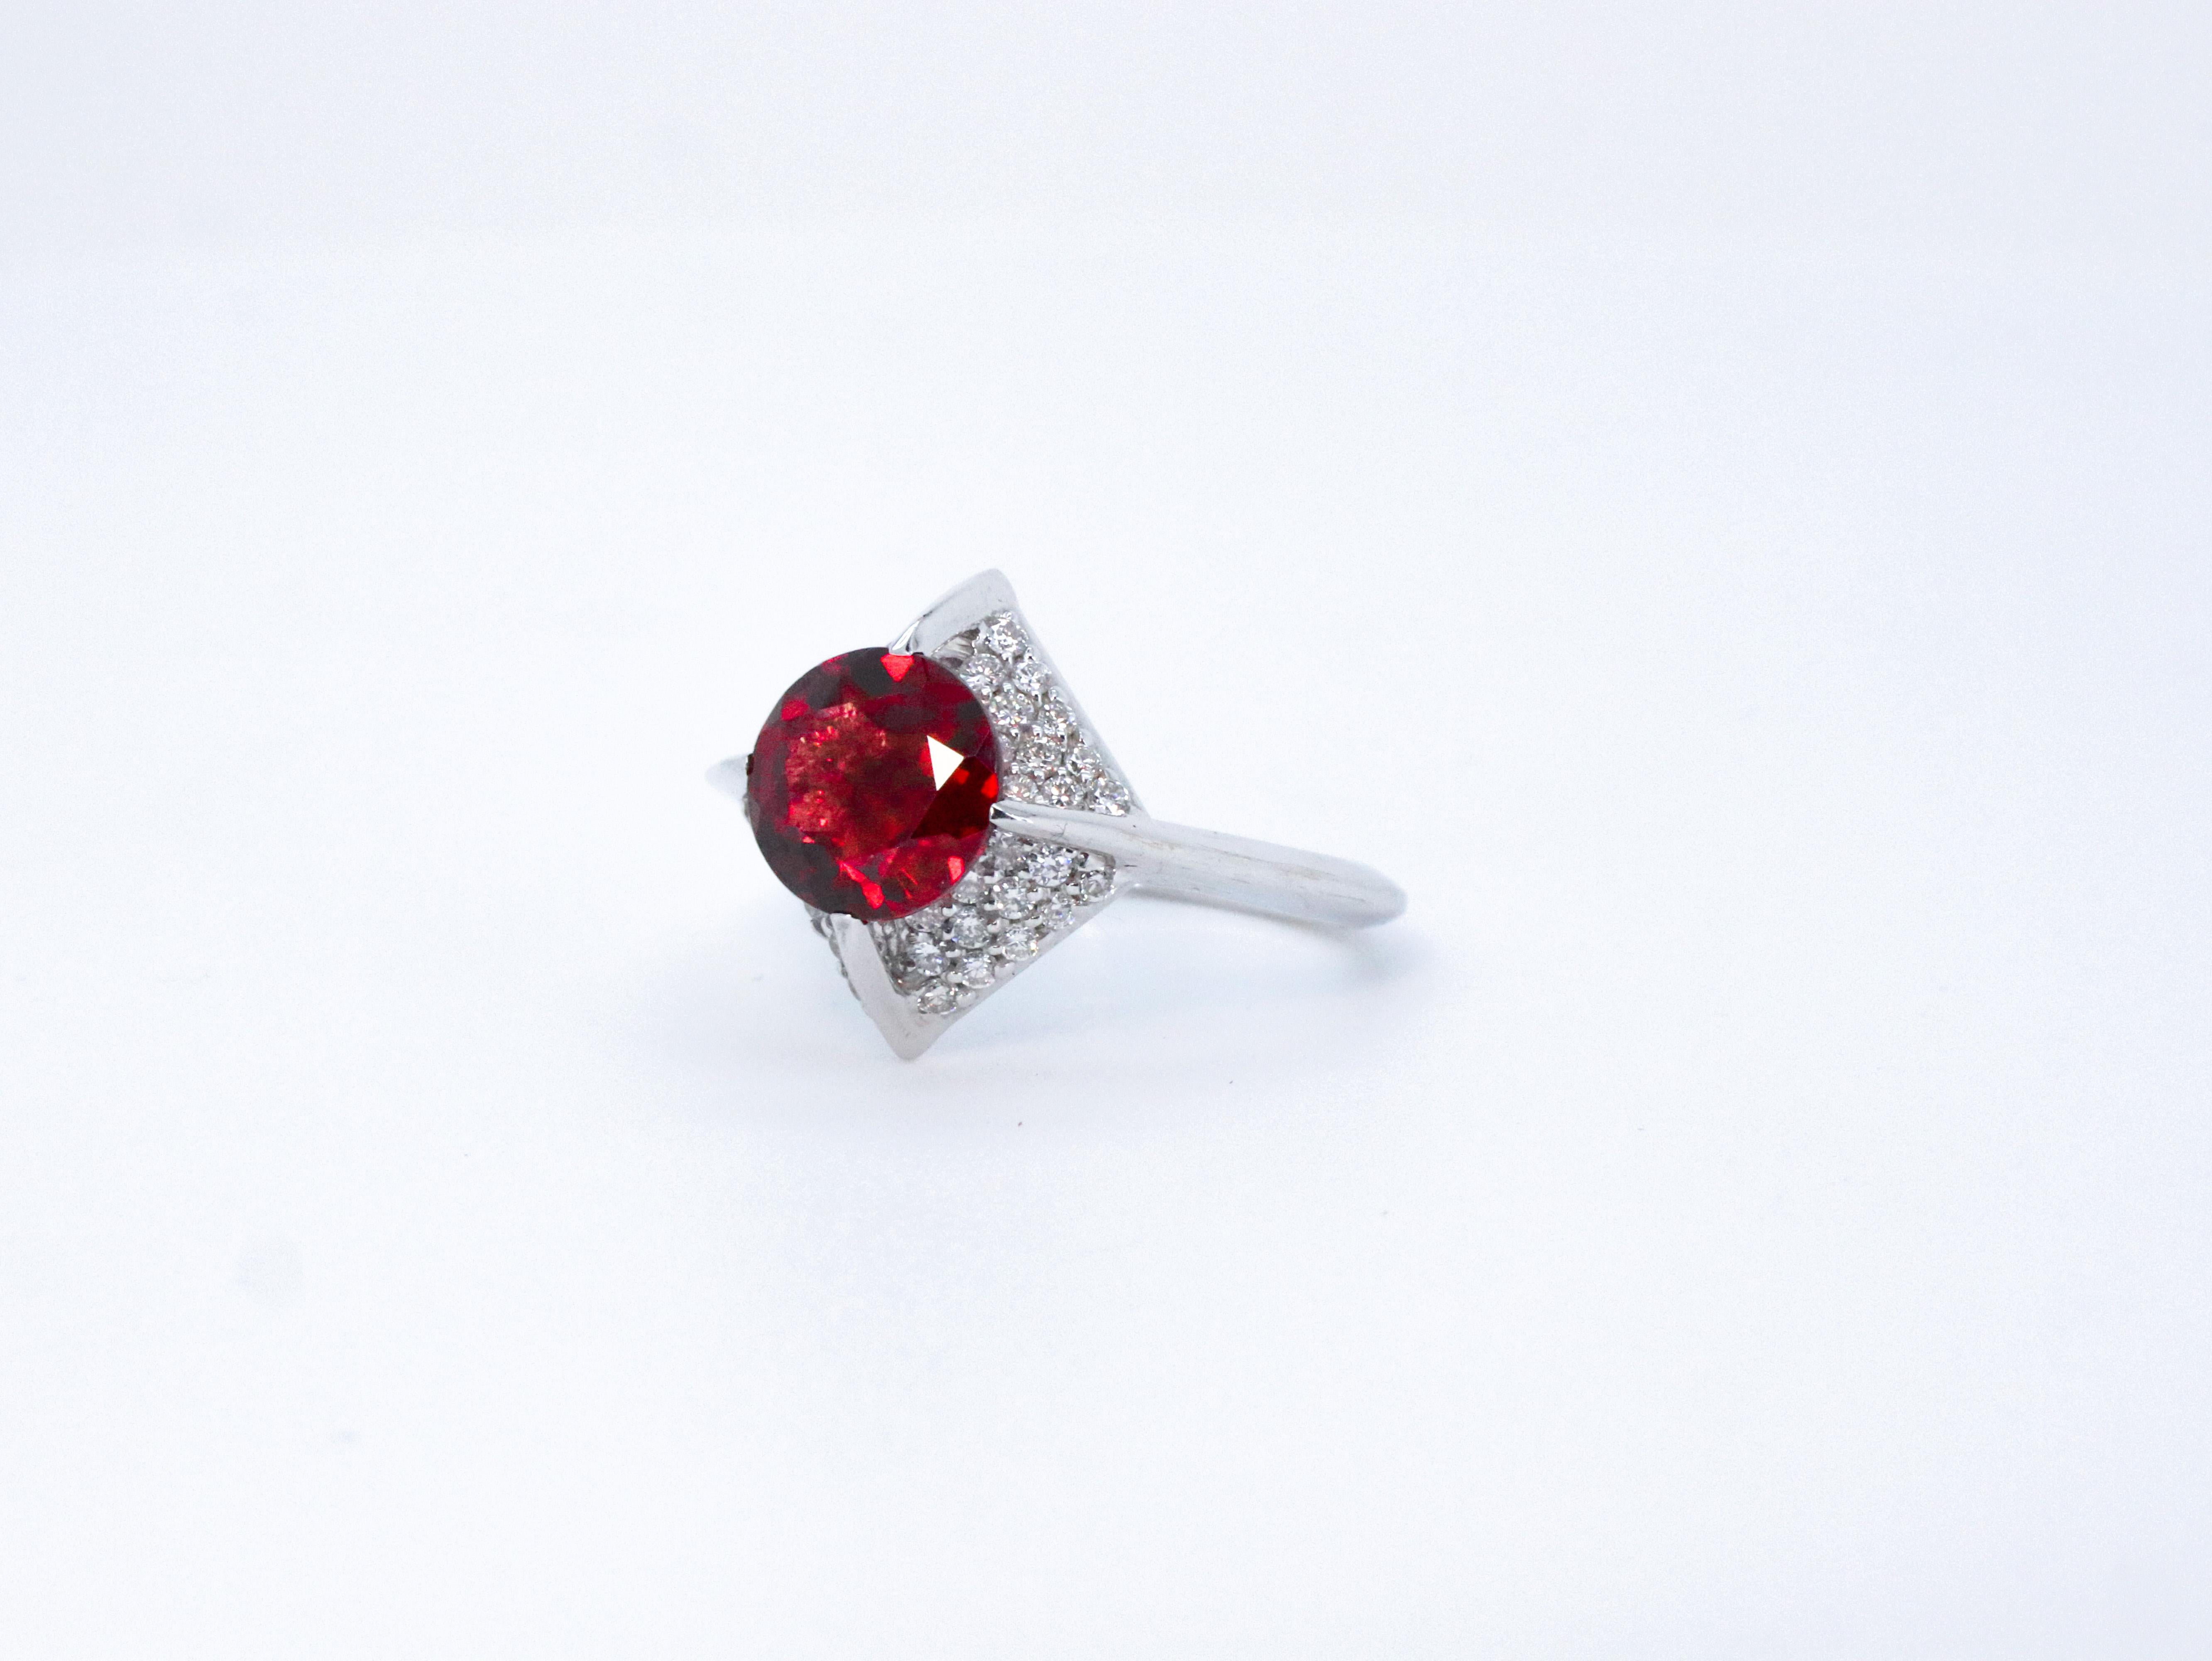 For Sale:  18K White Gold Made in Italy Diamond Rodolite Garnet Vogue Awarded Cocktail Ring 10